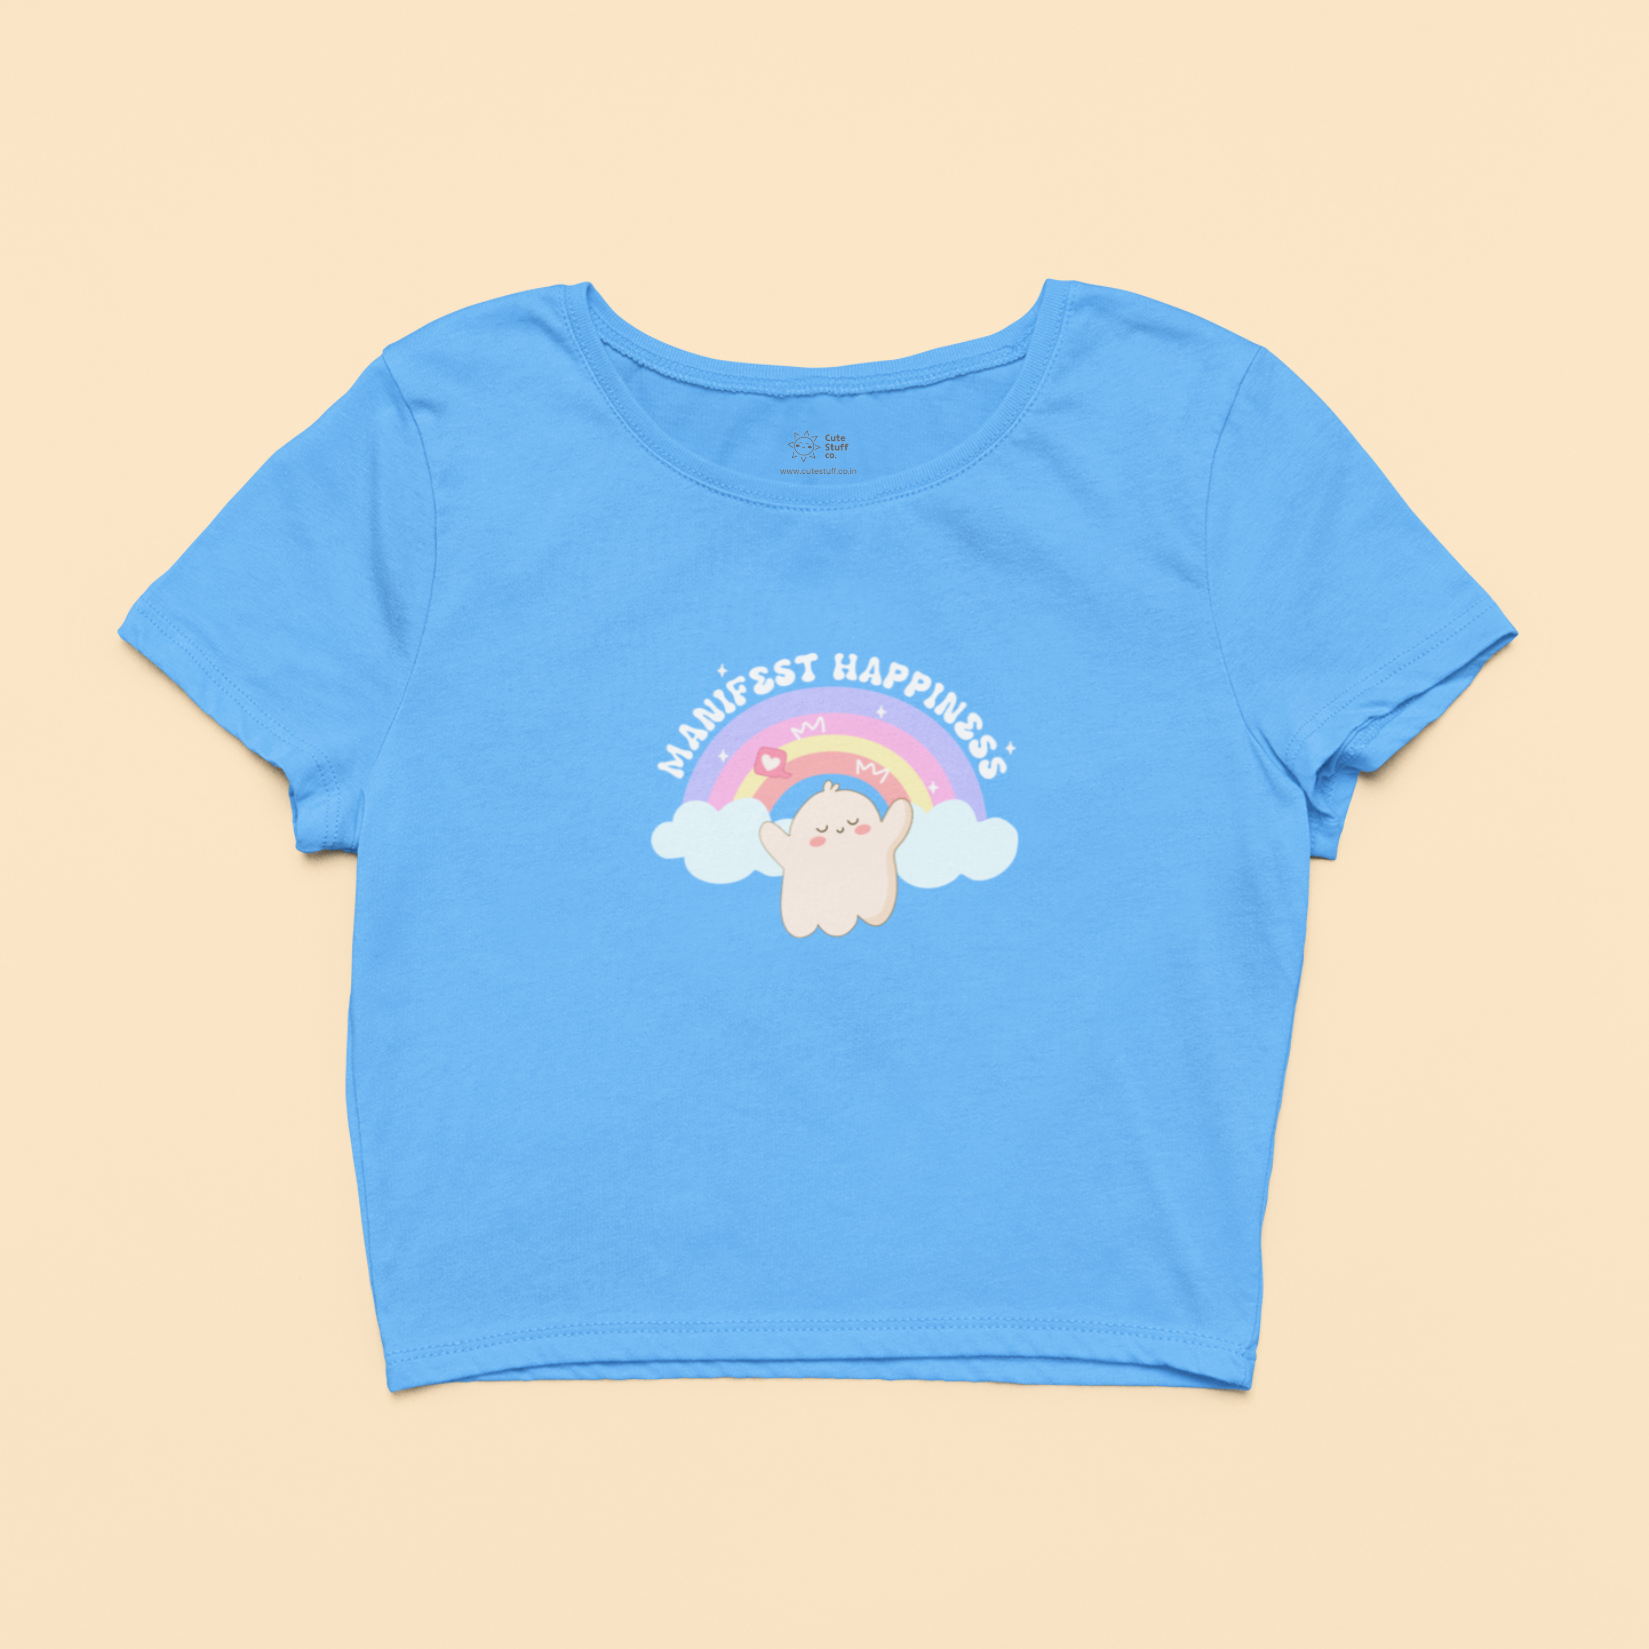 Manifest Happiness Lil Boo Crop Tops By Cute Stuff Co. 180 GSM